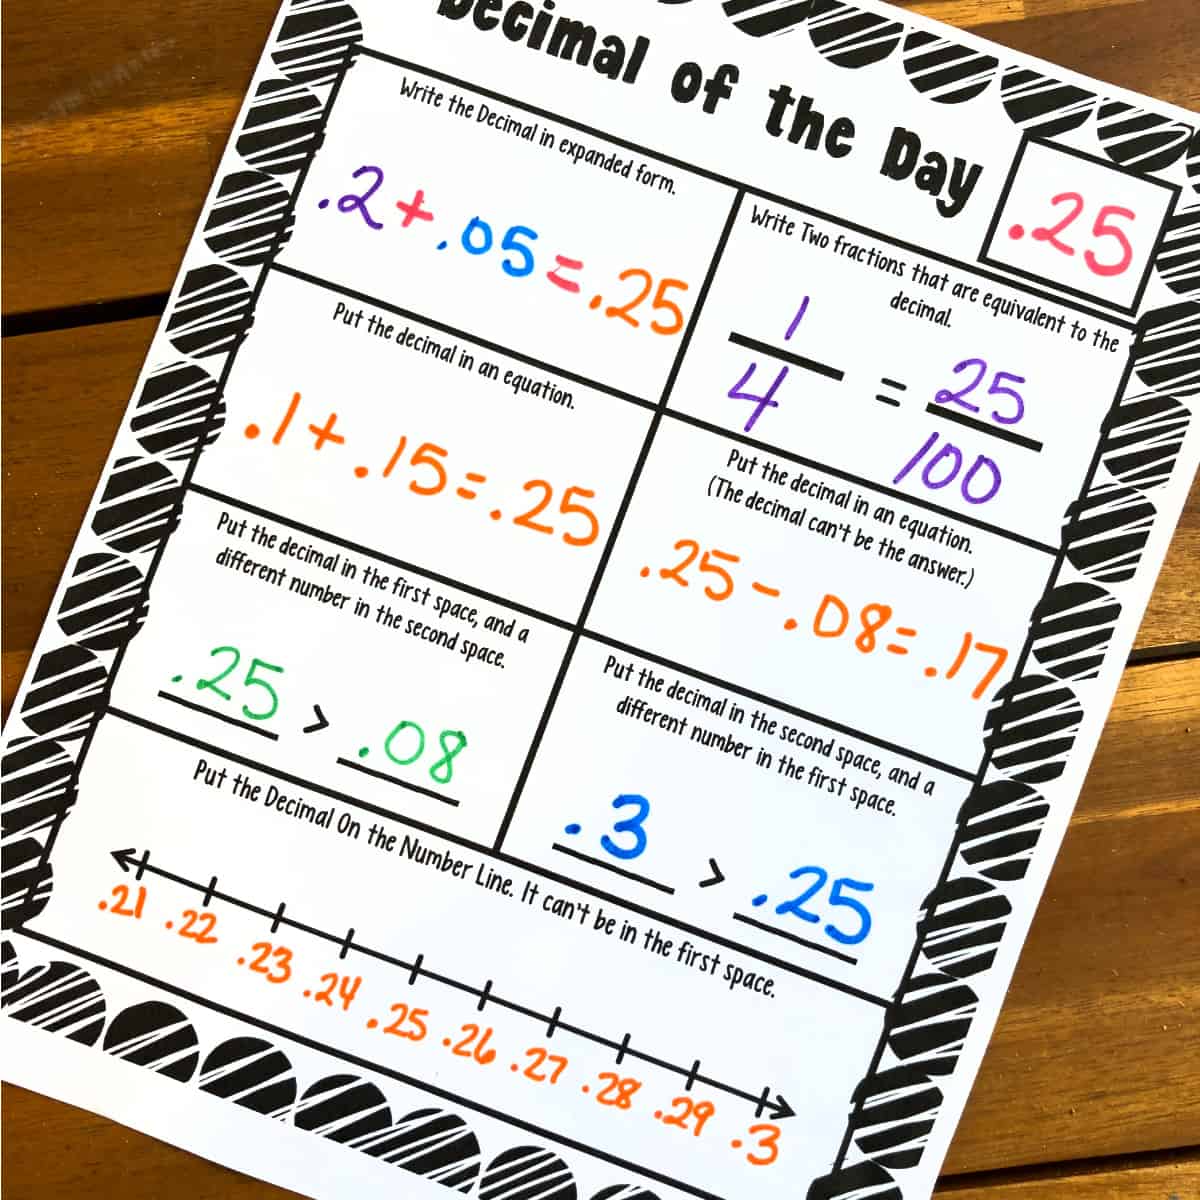 Decimal of The Day – A FREE printable to Review Decimals Daily